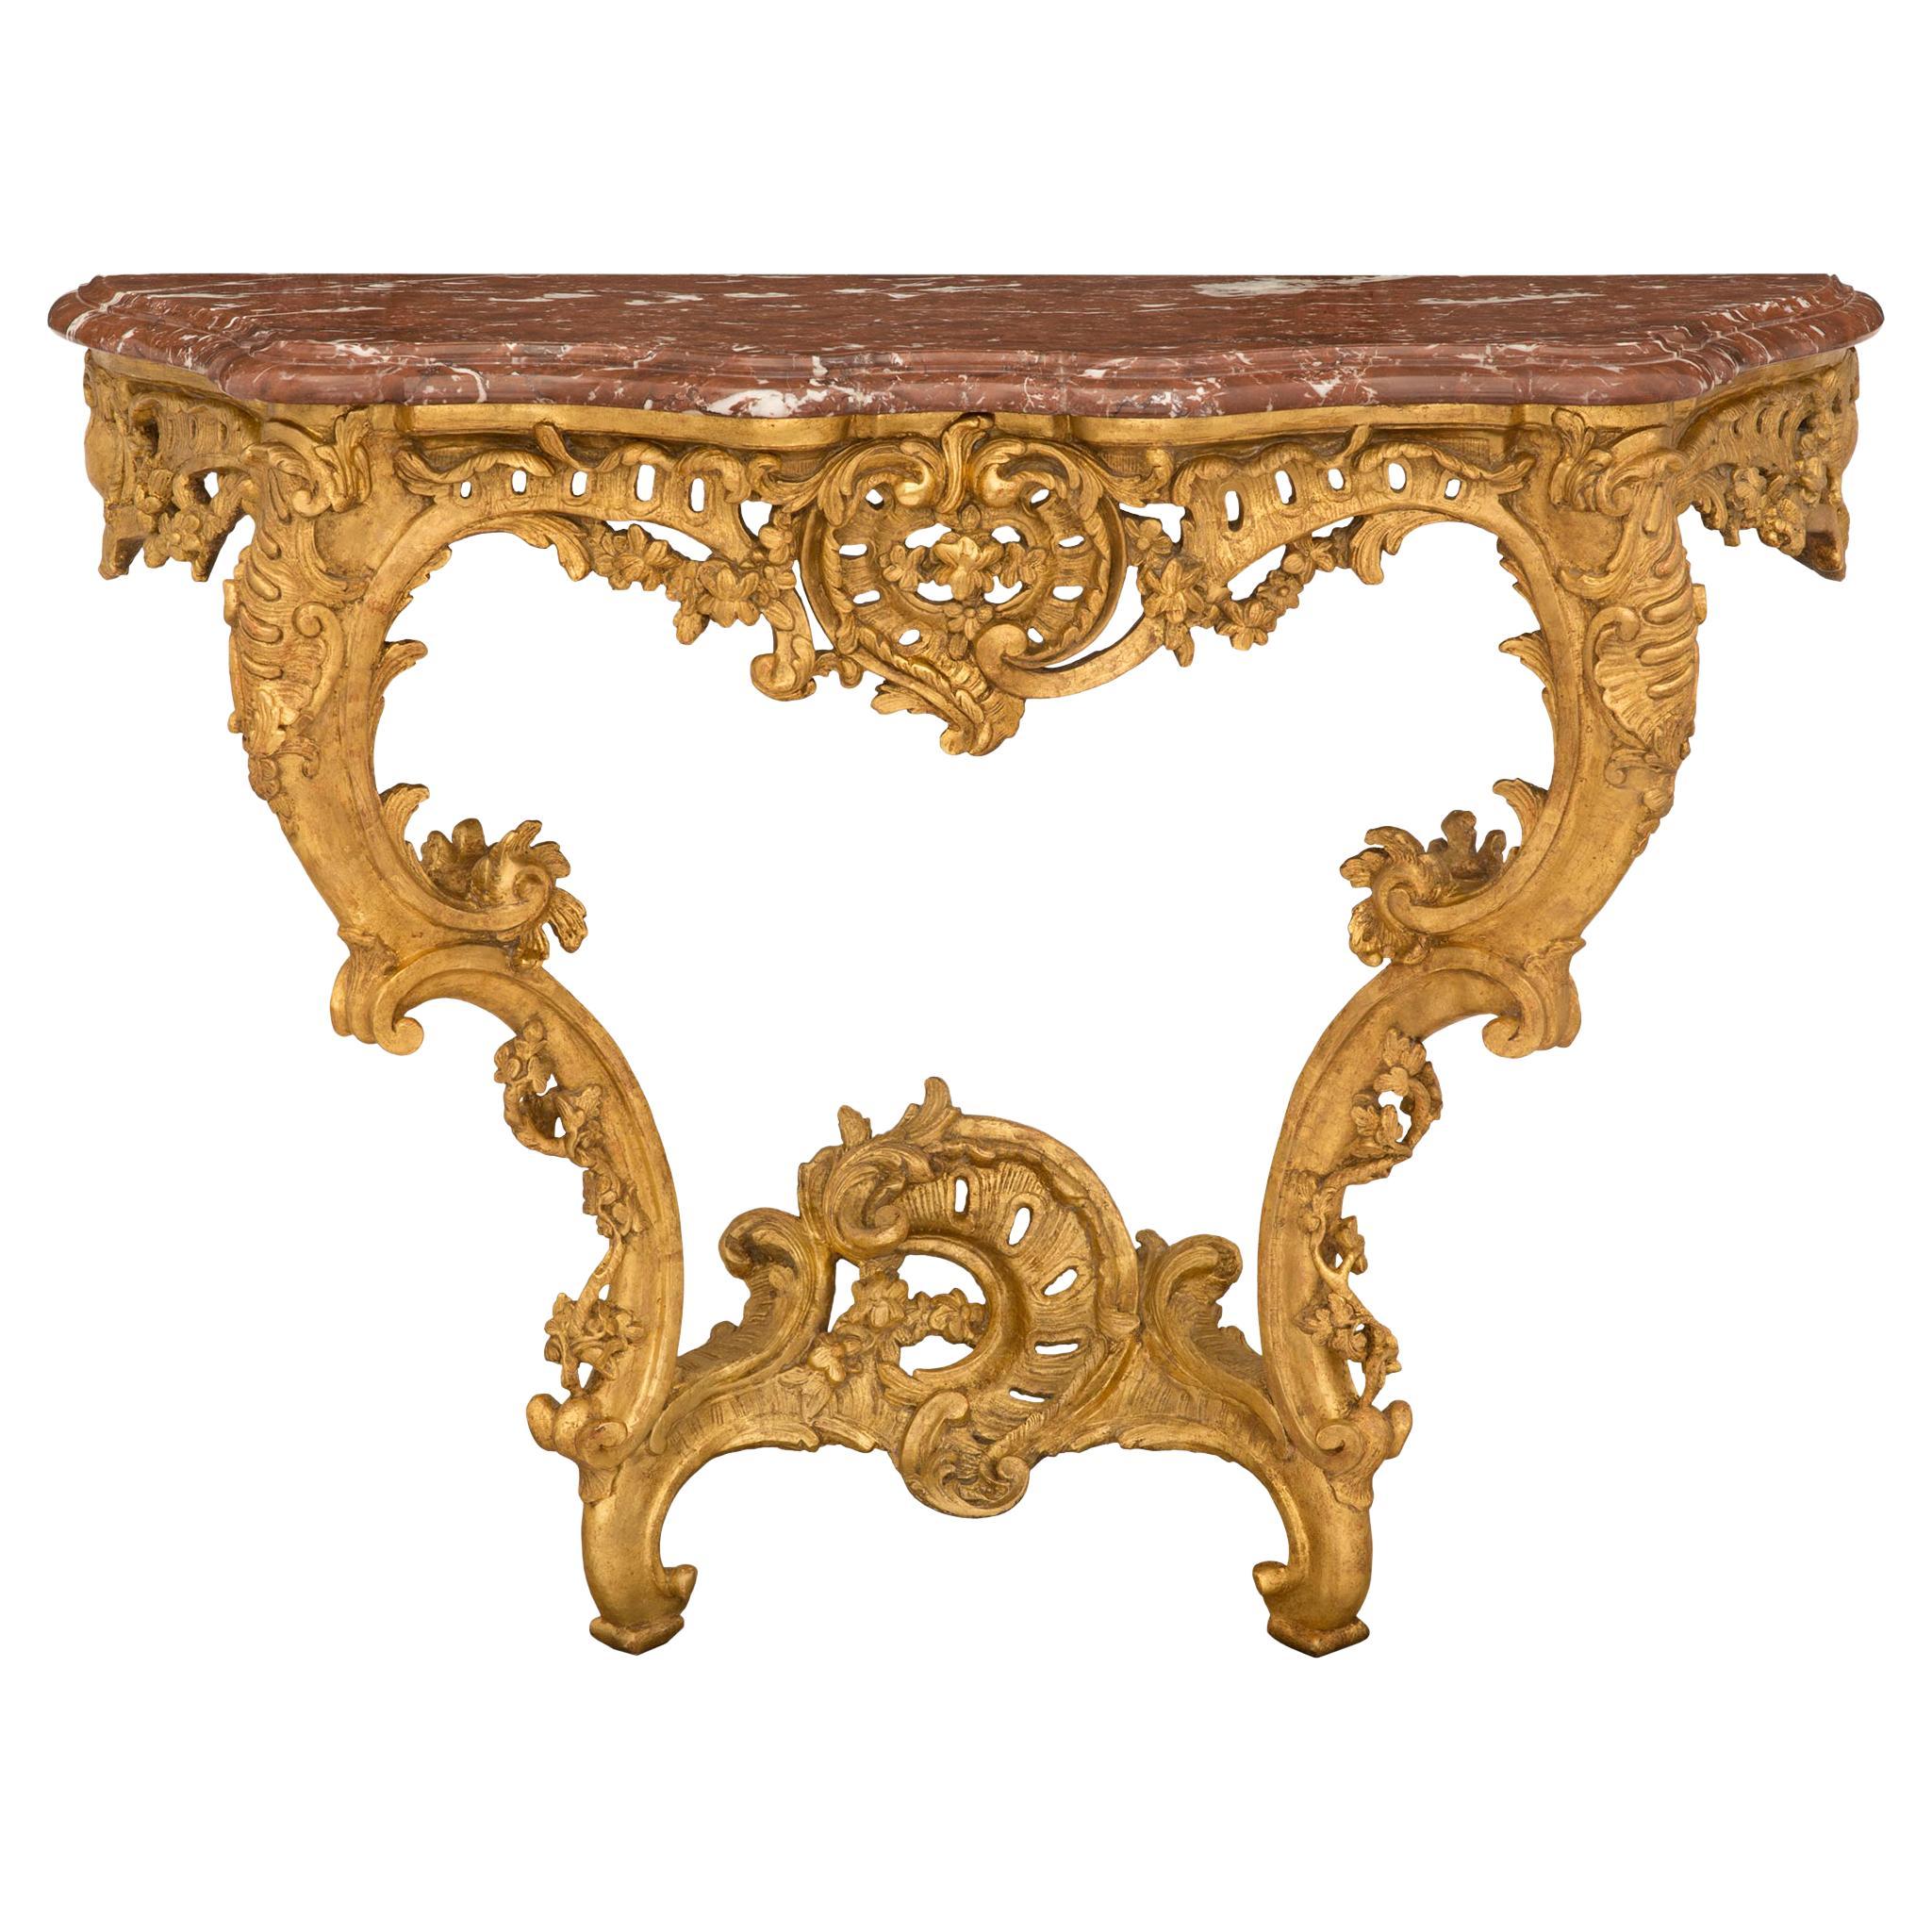 Italian 18th Century Régence Period Giltwood and Rouge Royale Marble Console